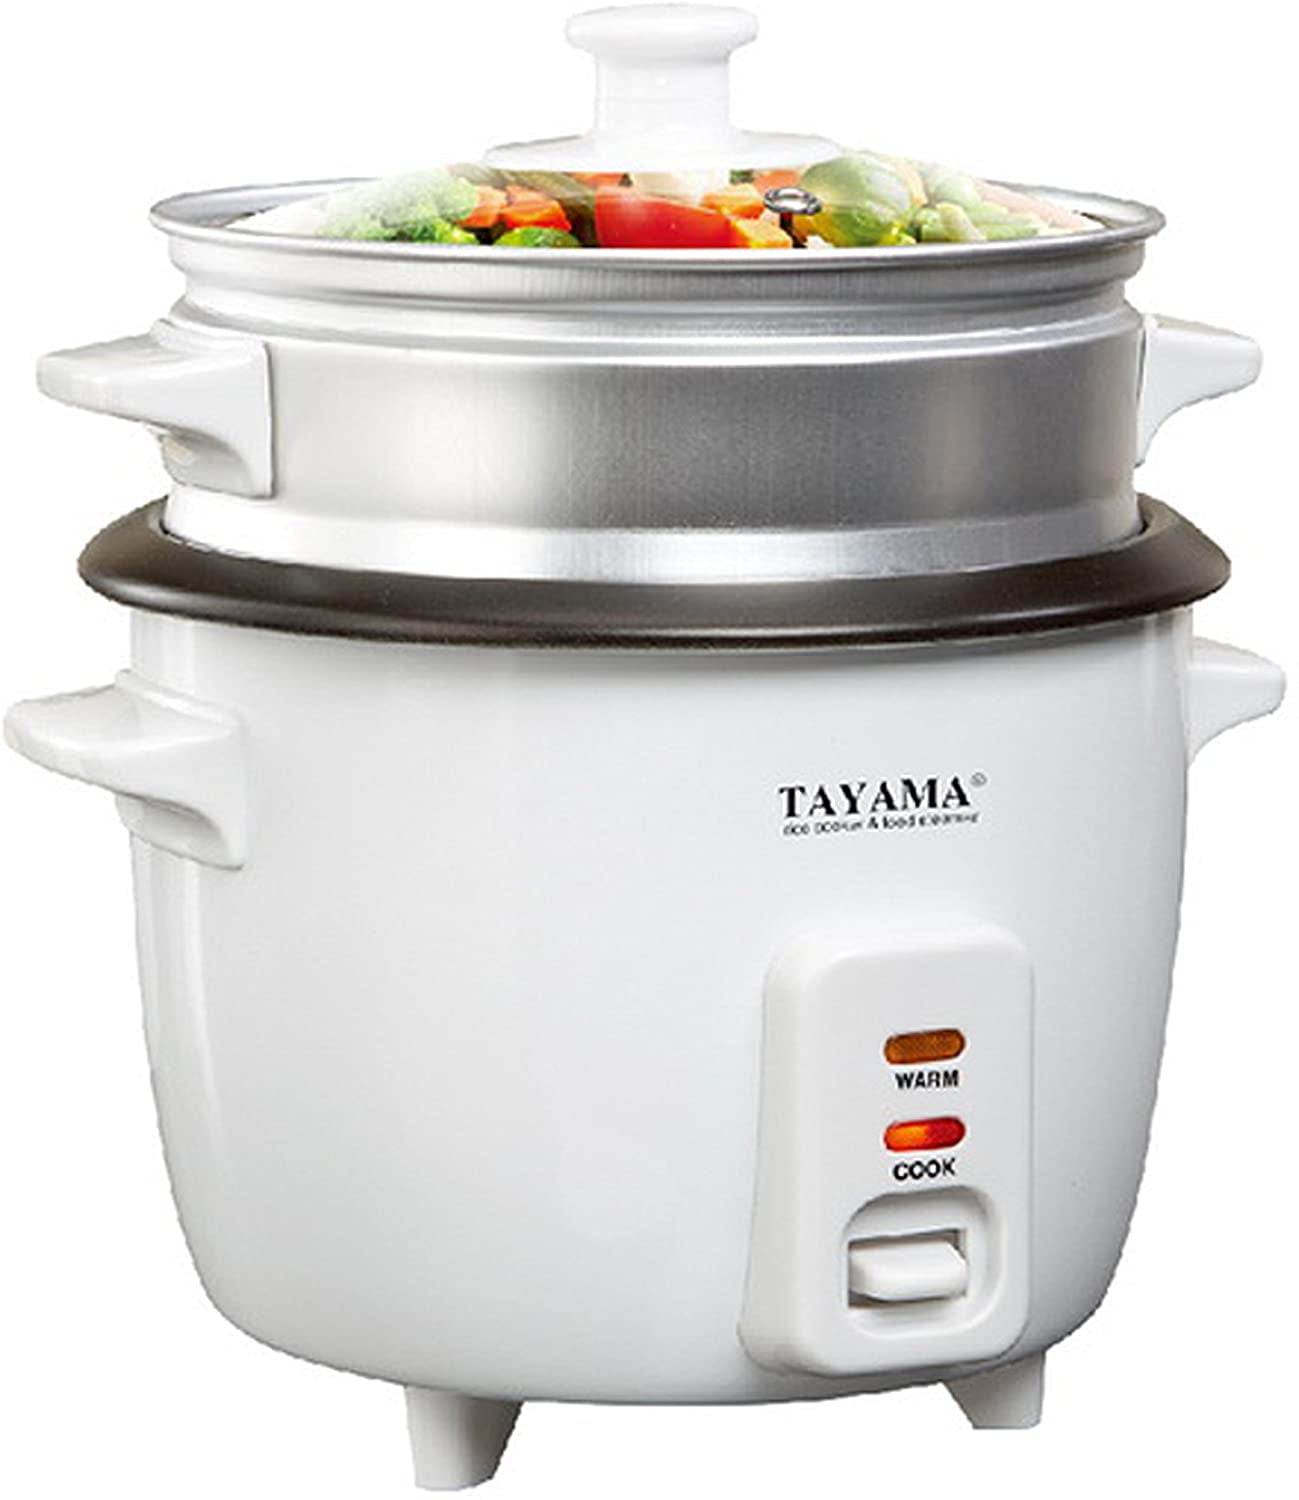 COMFEE' Rice Cooker 10 cup uncooked, Food Steamer, Stewpot, Saute All in  One (12 Digital Cooking Programs) Multi Cooker Large Capacity 5.2Qt, 24  Hours